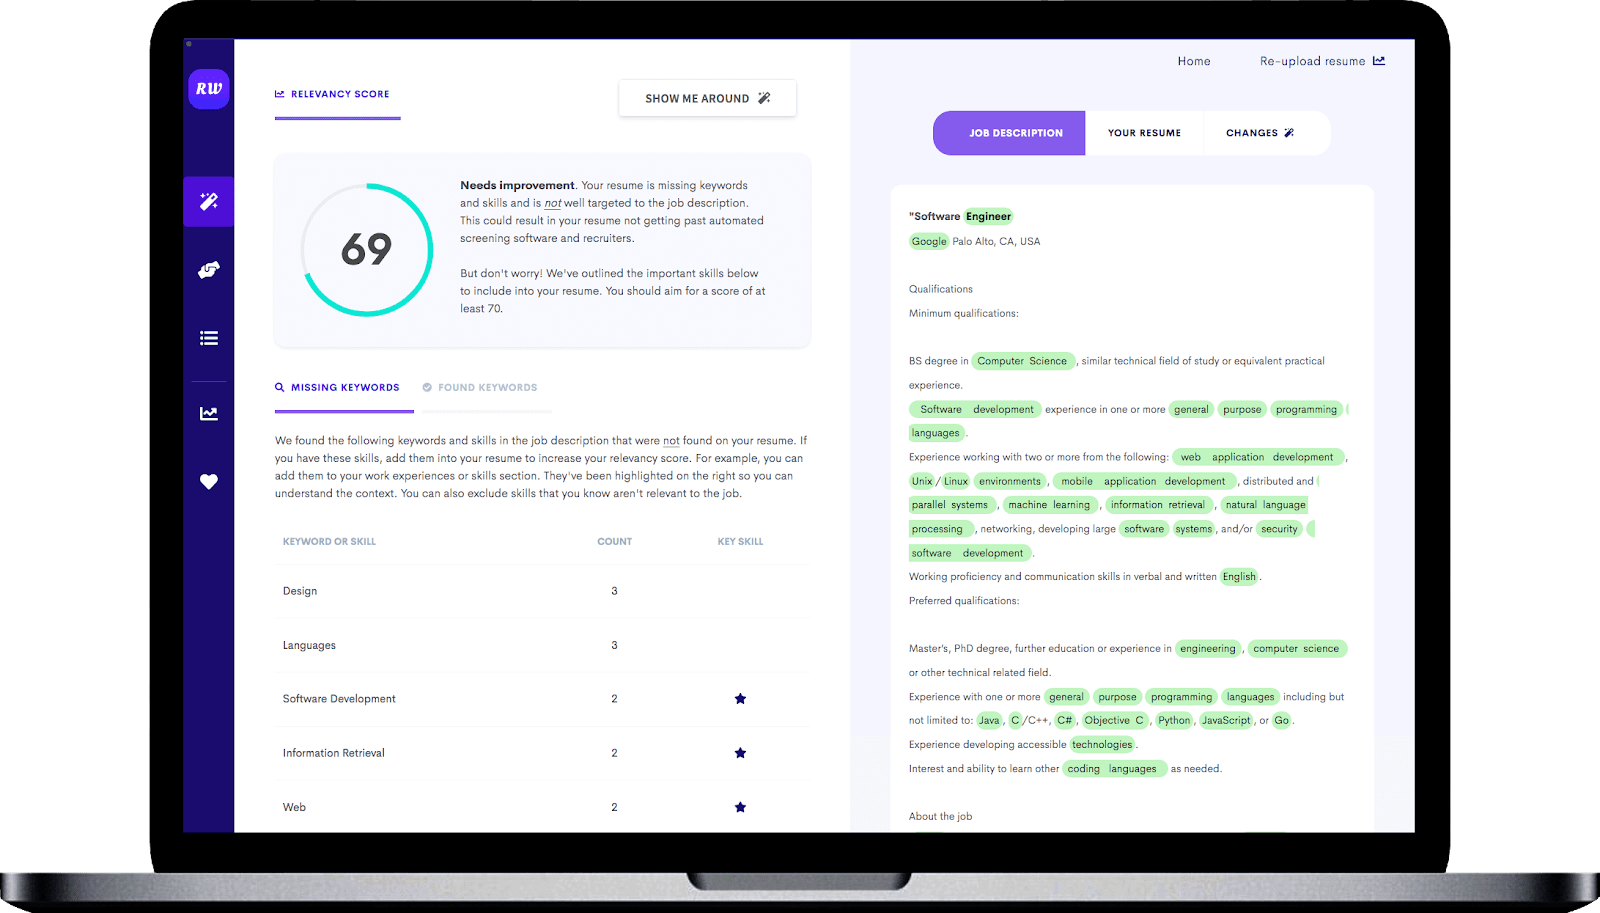 Tailor your resume to include the skills and keywords hiring managers look for when screening applicants with Resume Worded’s Targeted Resume tool